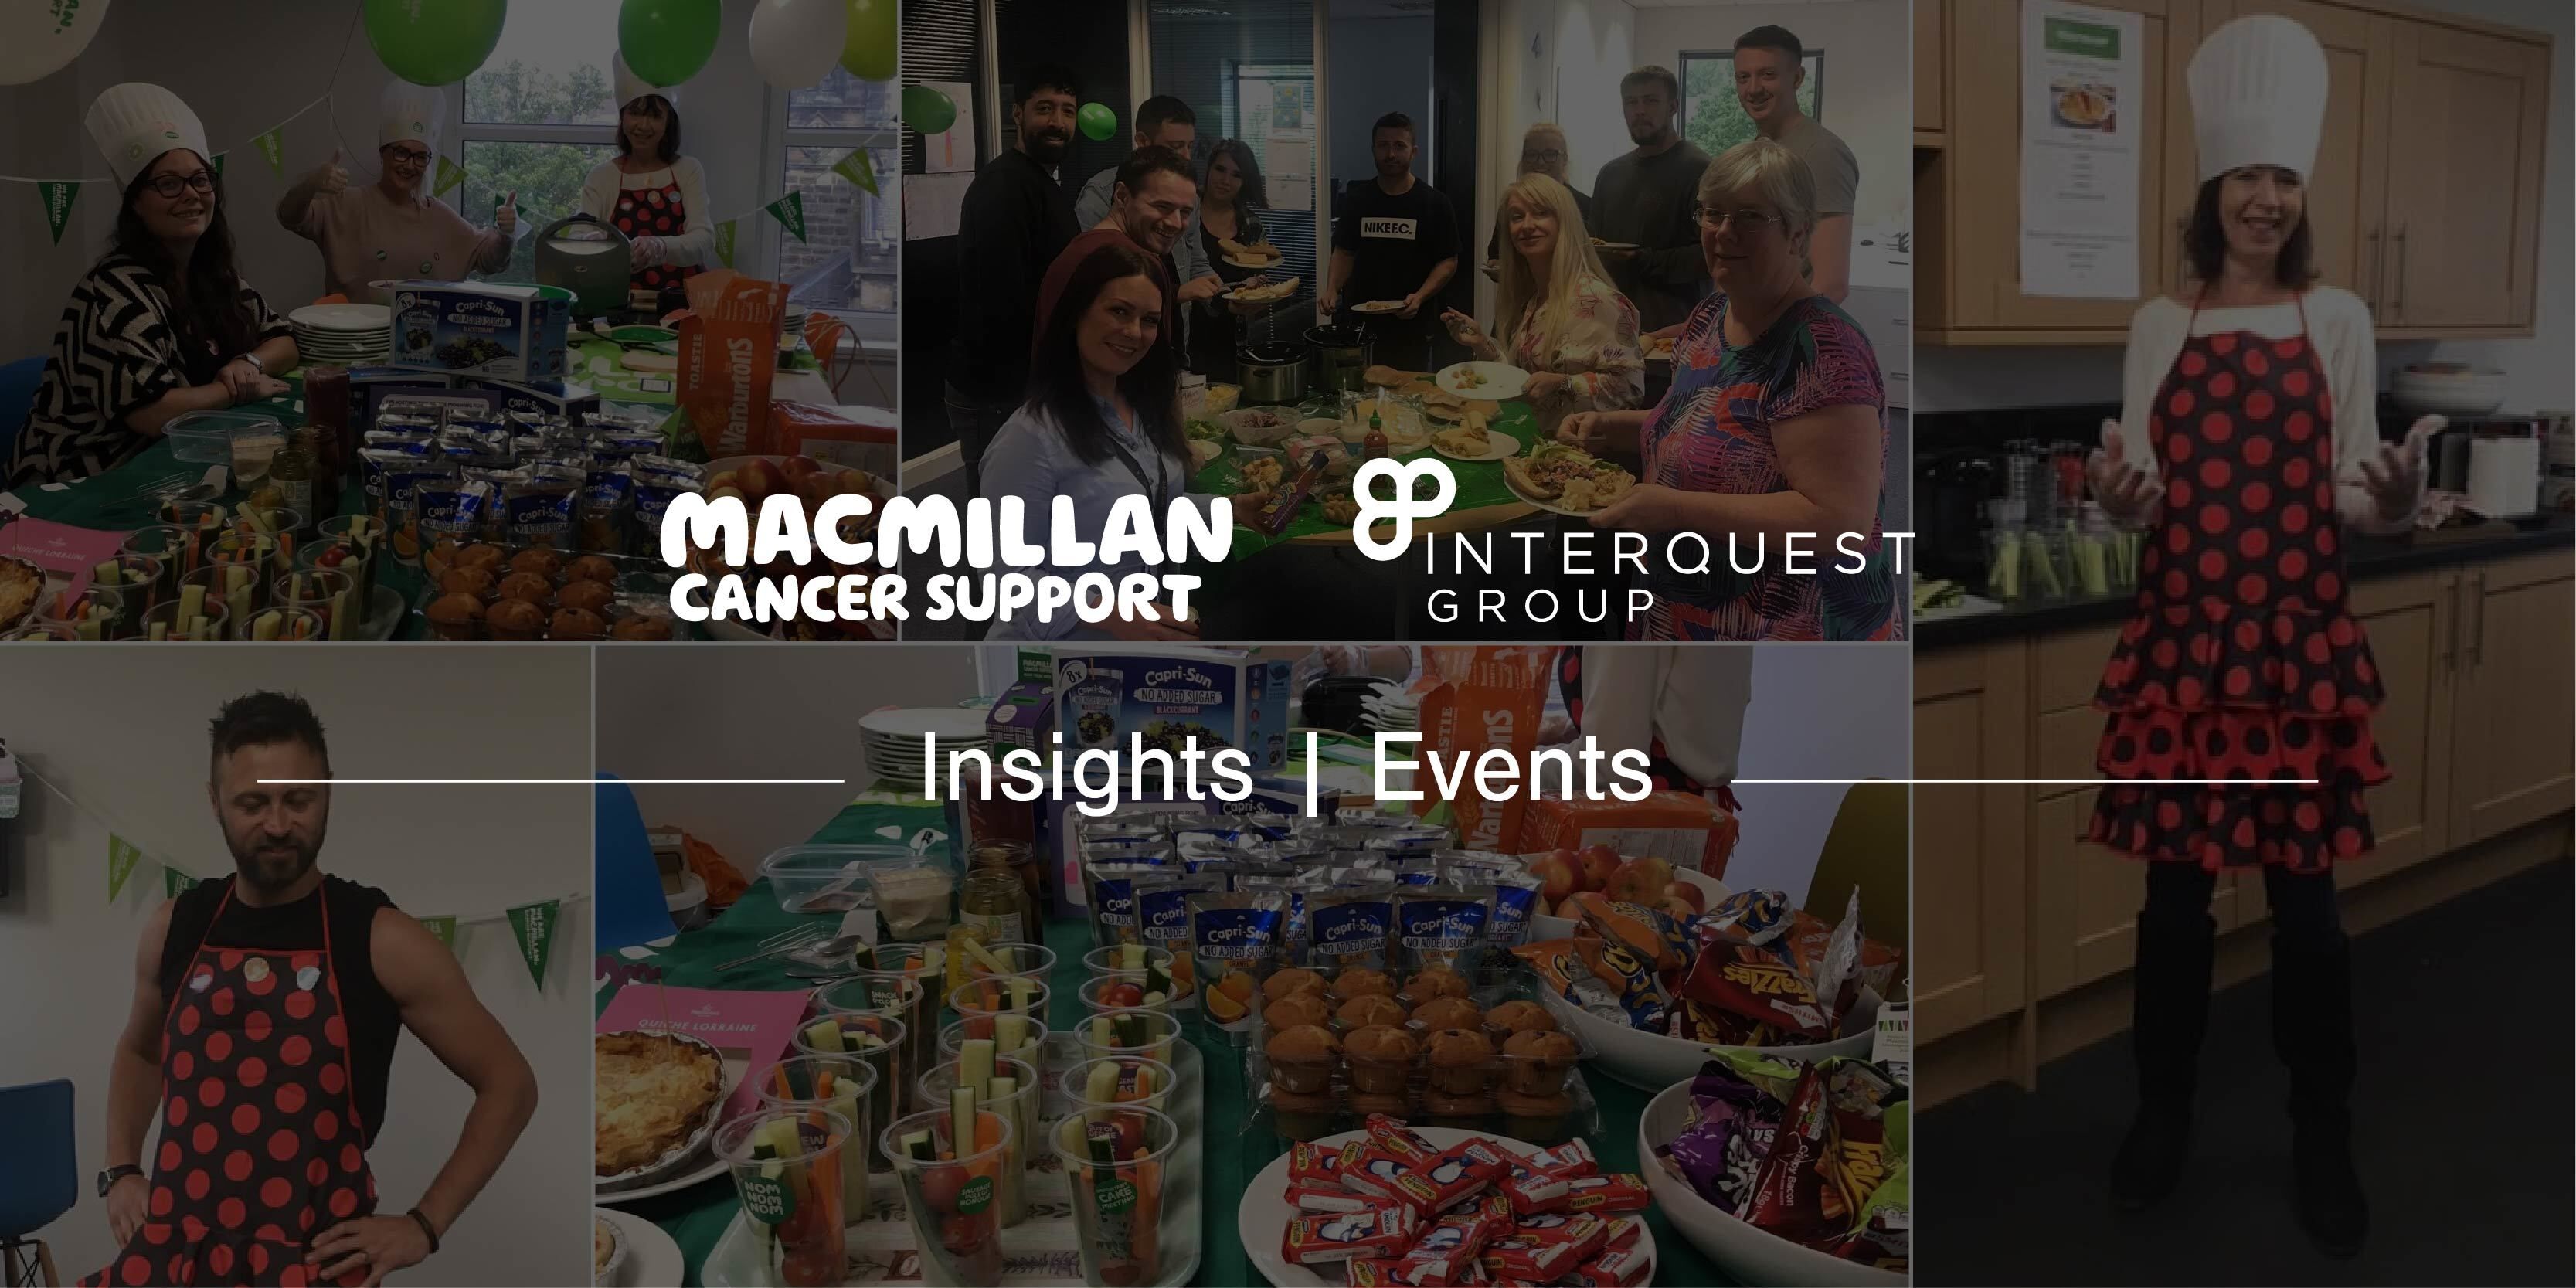 White Macmillan and InterQuest Group logos on collage background of photos from Macmillan Coffee Morning